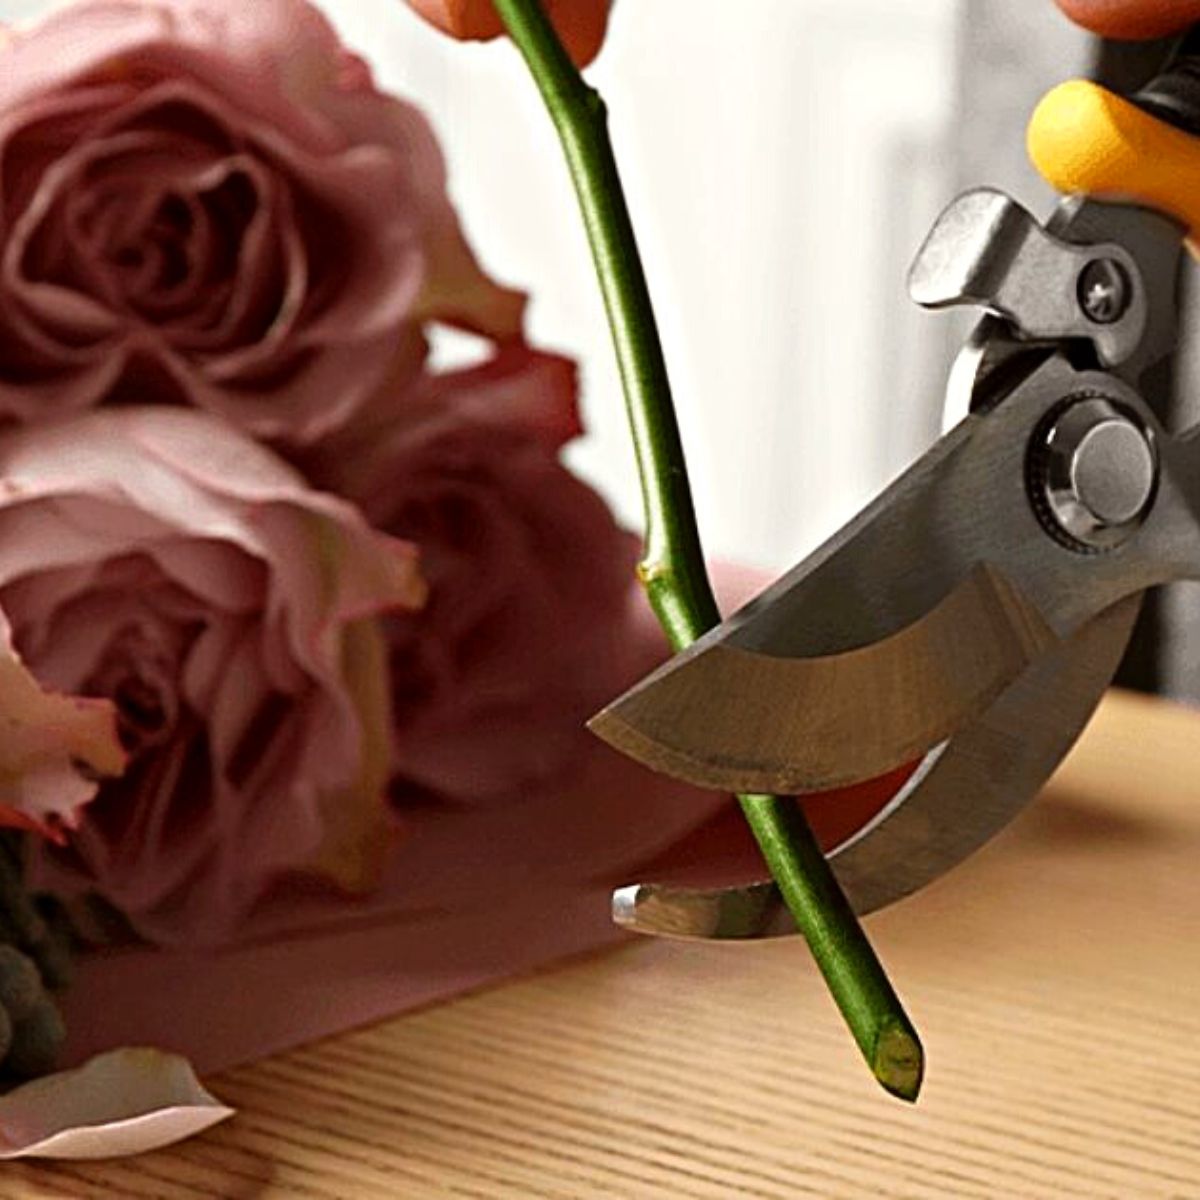 Best Care for cut roses - cutting at 45 degree angle - On Thursd 